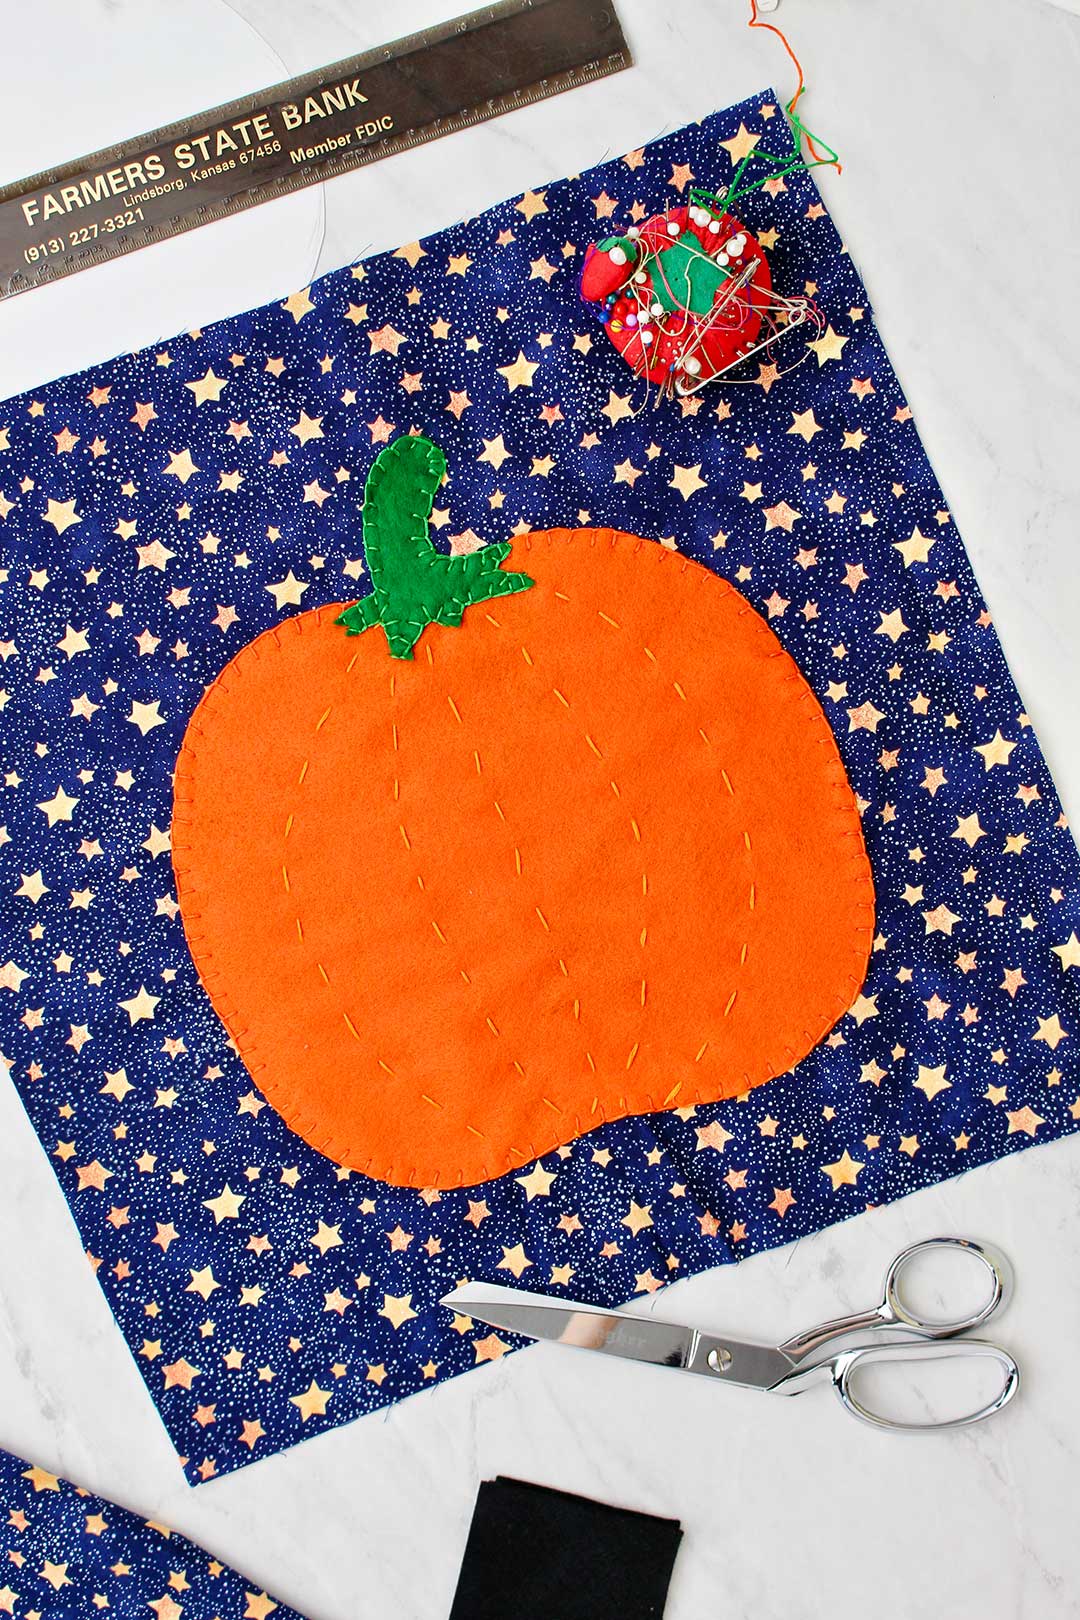 Fabric pumpkin cut out laying on a square of starry blue fabric with sewing supplies near.